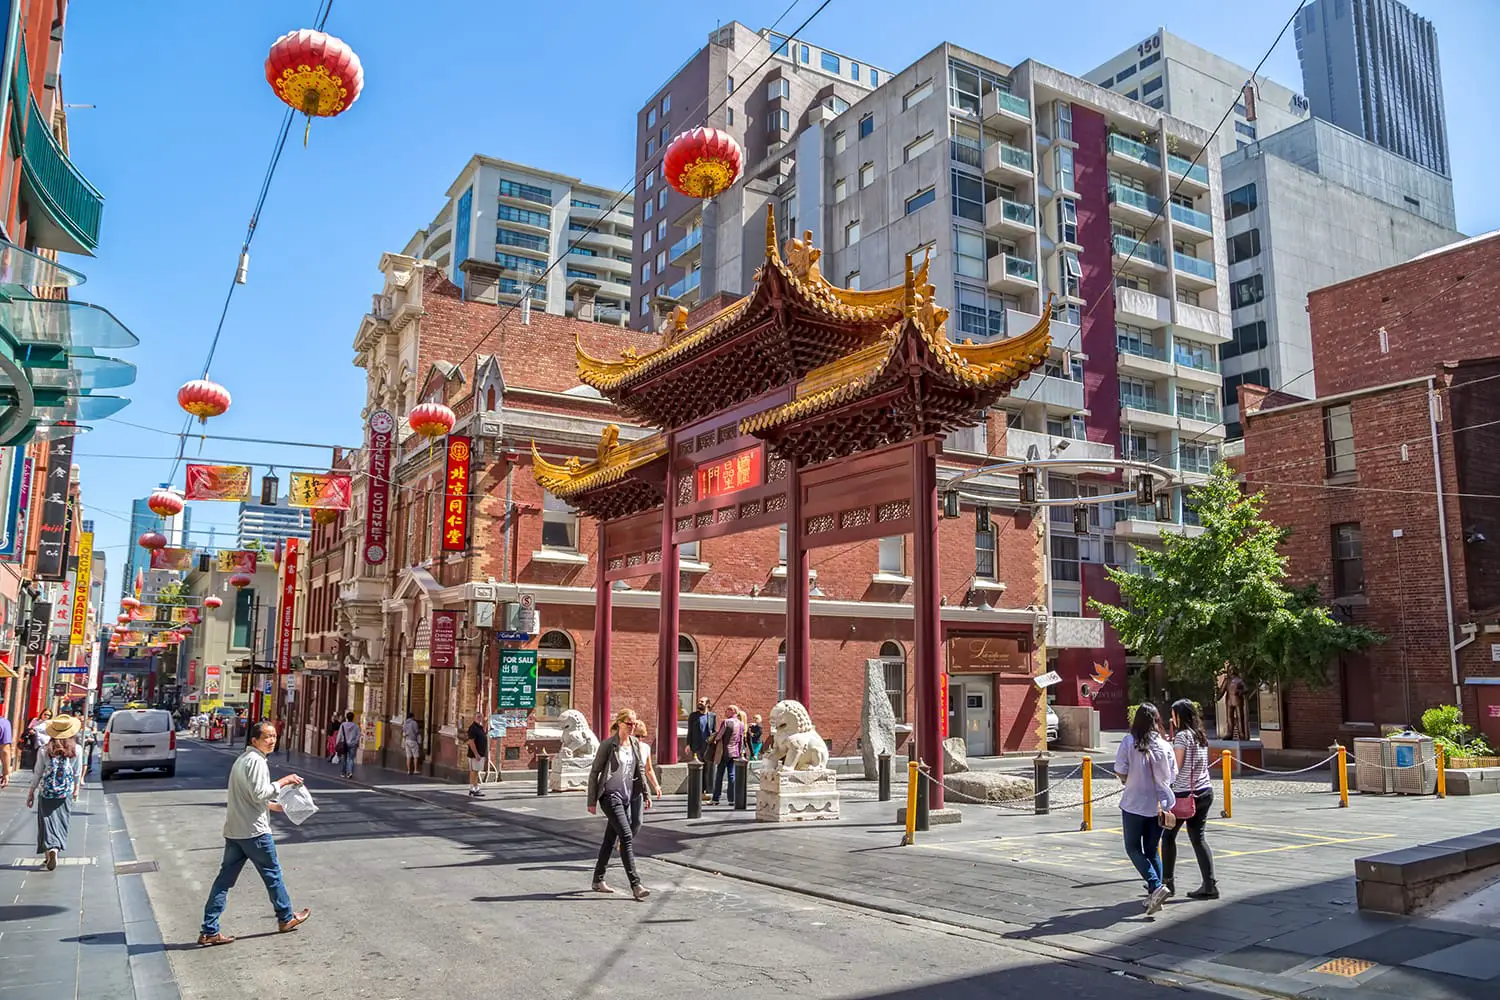 People walk down the Chinatown main street by the Heaven archway, gift from Jiangsu province. Melbourne, Australia